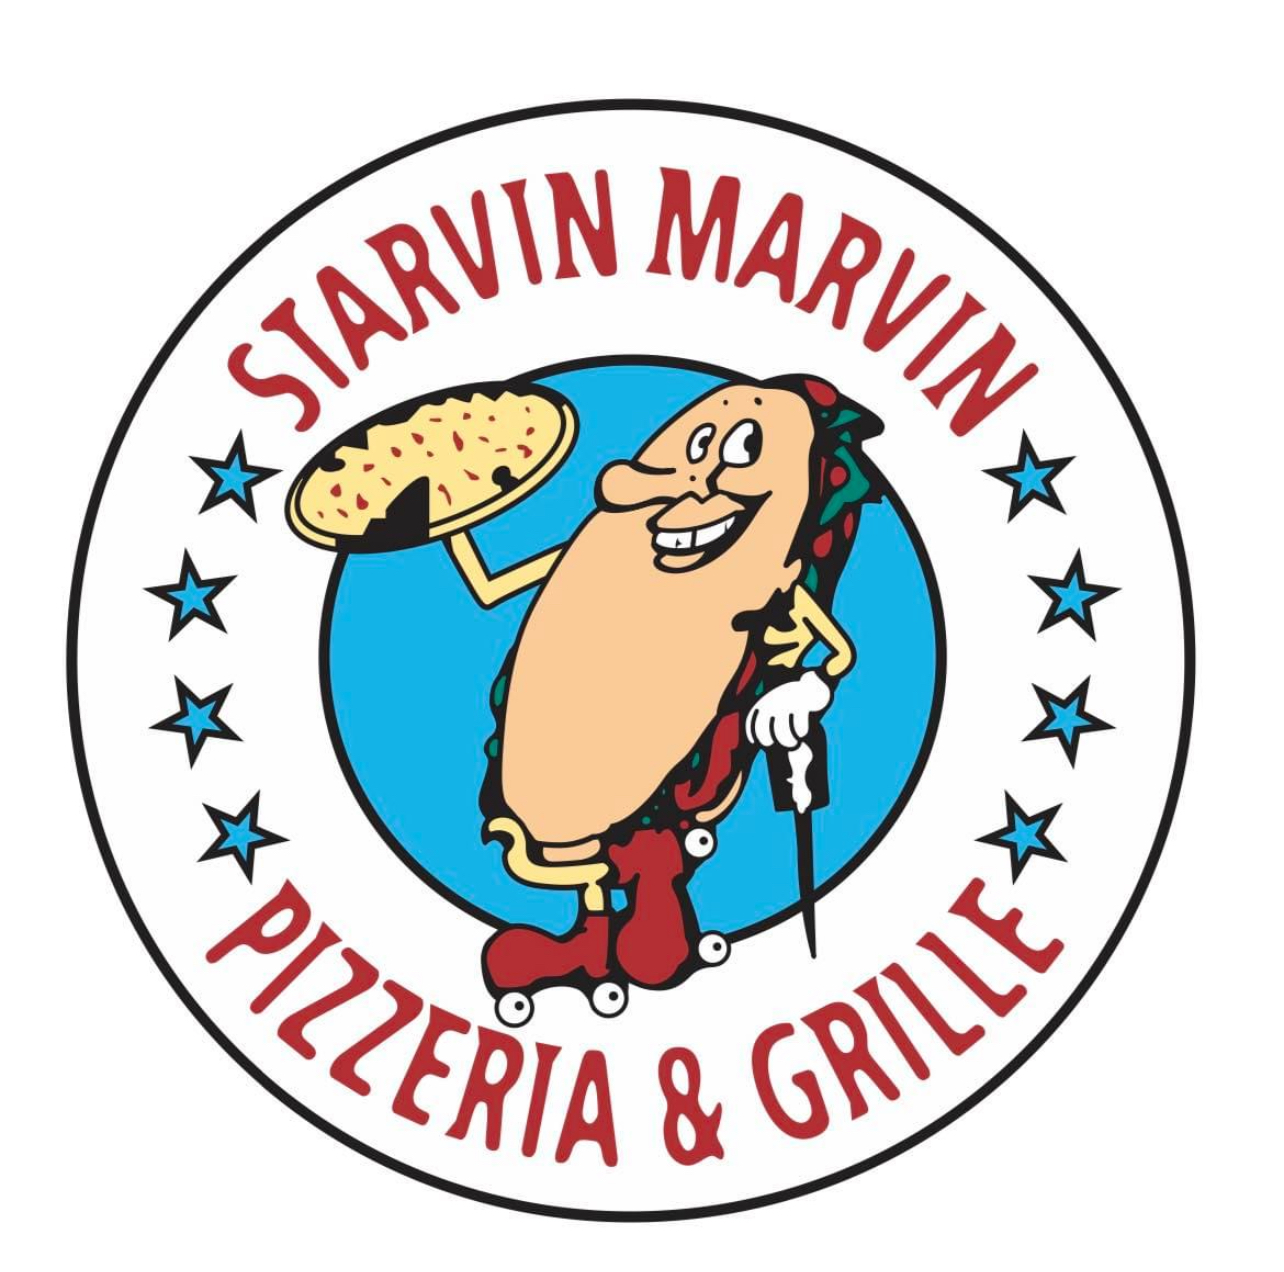 Starvin Marvin’s Pizzeria & Grille